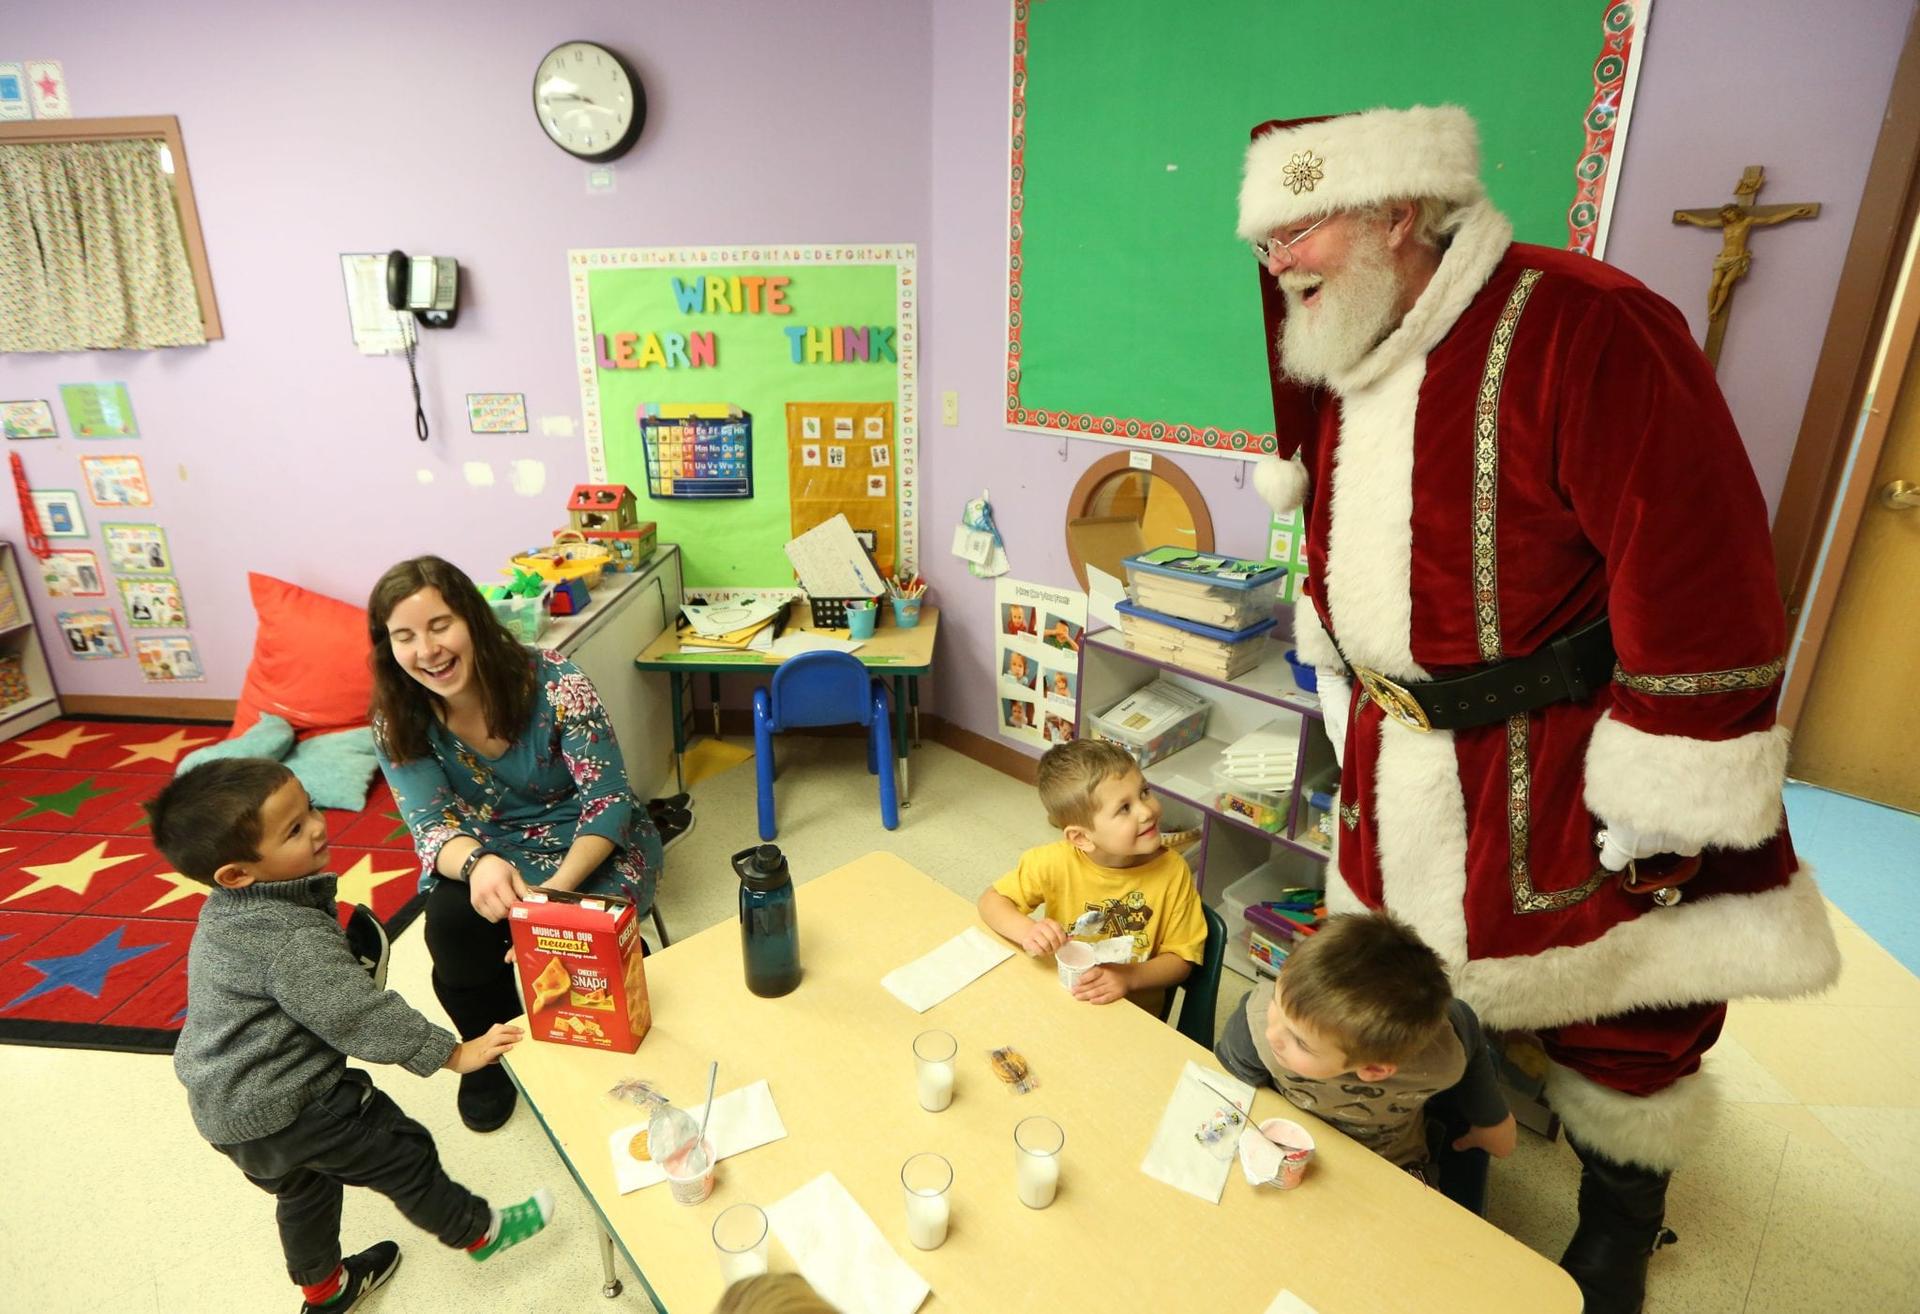 Santa has heart for bringing joy, true meaning of Christmas to children